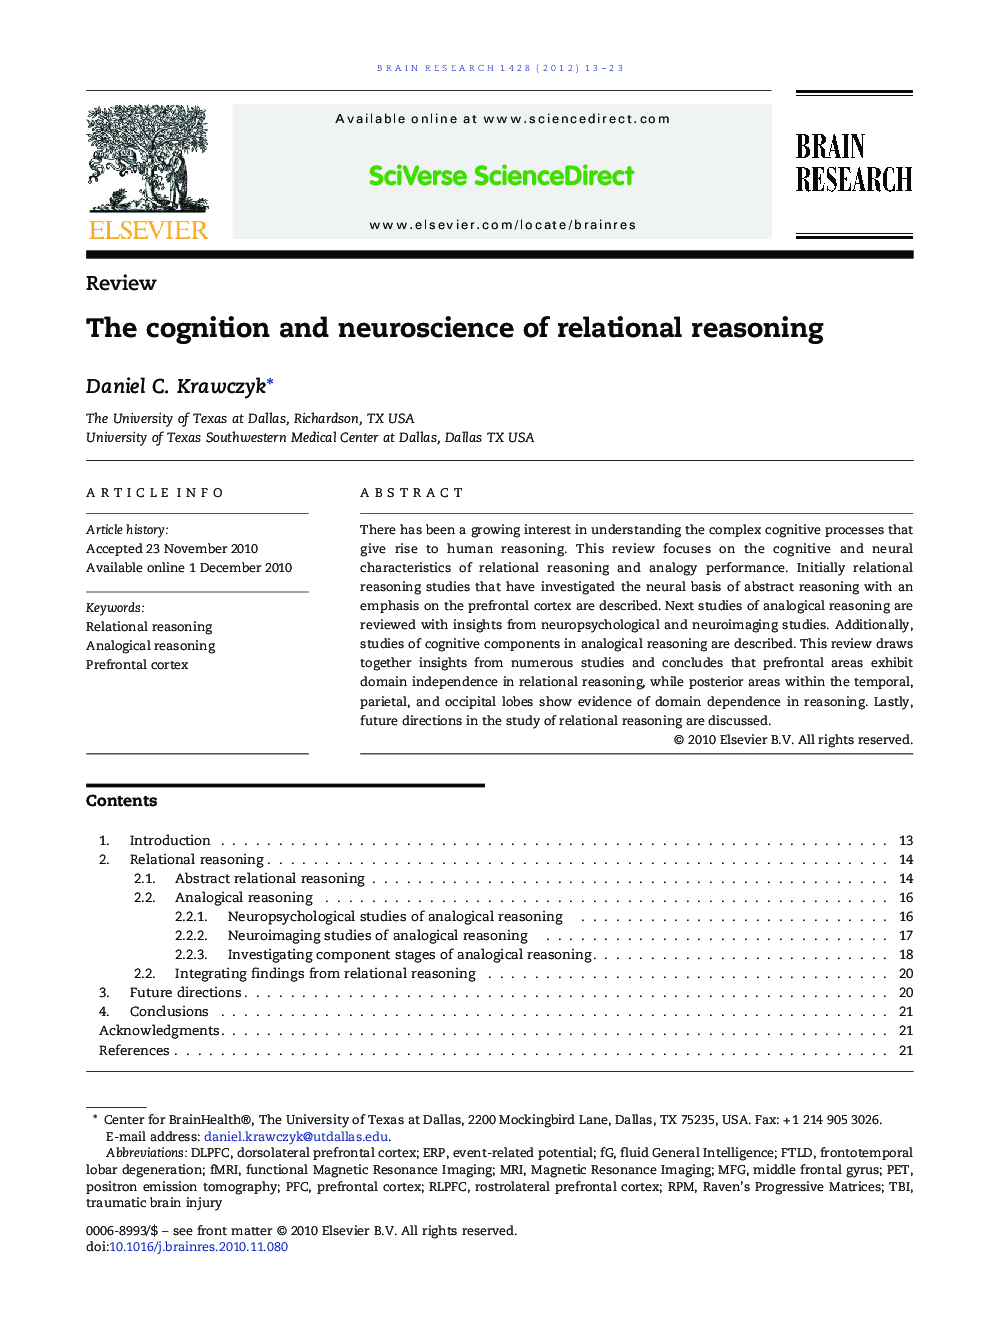 The cognition and neuroscience of relational reasoning